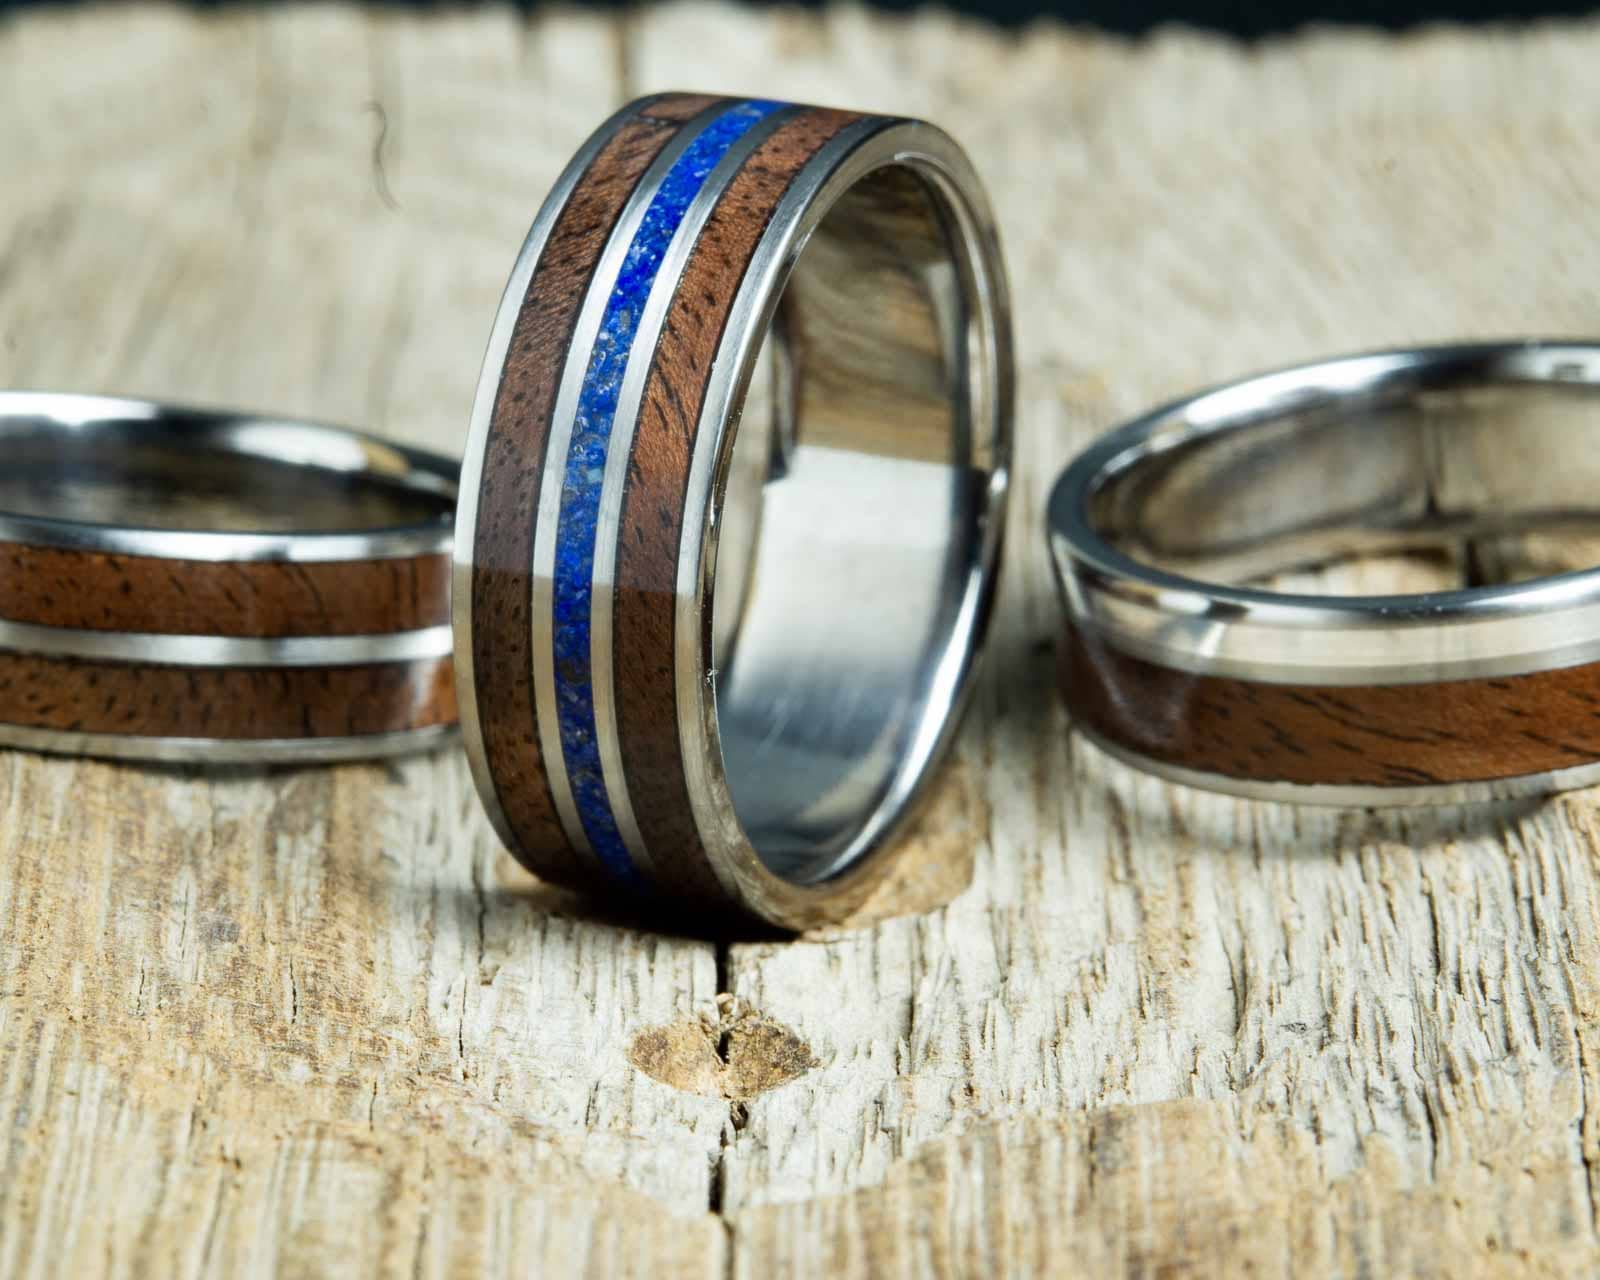 Collection of custom rings made with reclaimed Black Walnut wood and various inlays like silver, copper, and natural stones made by Peacefield Titanium 